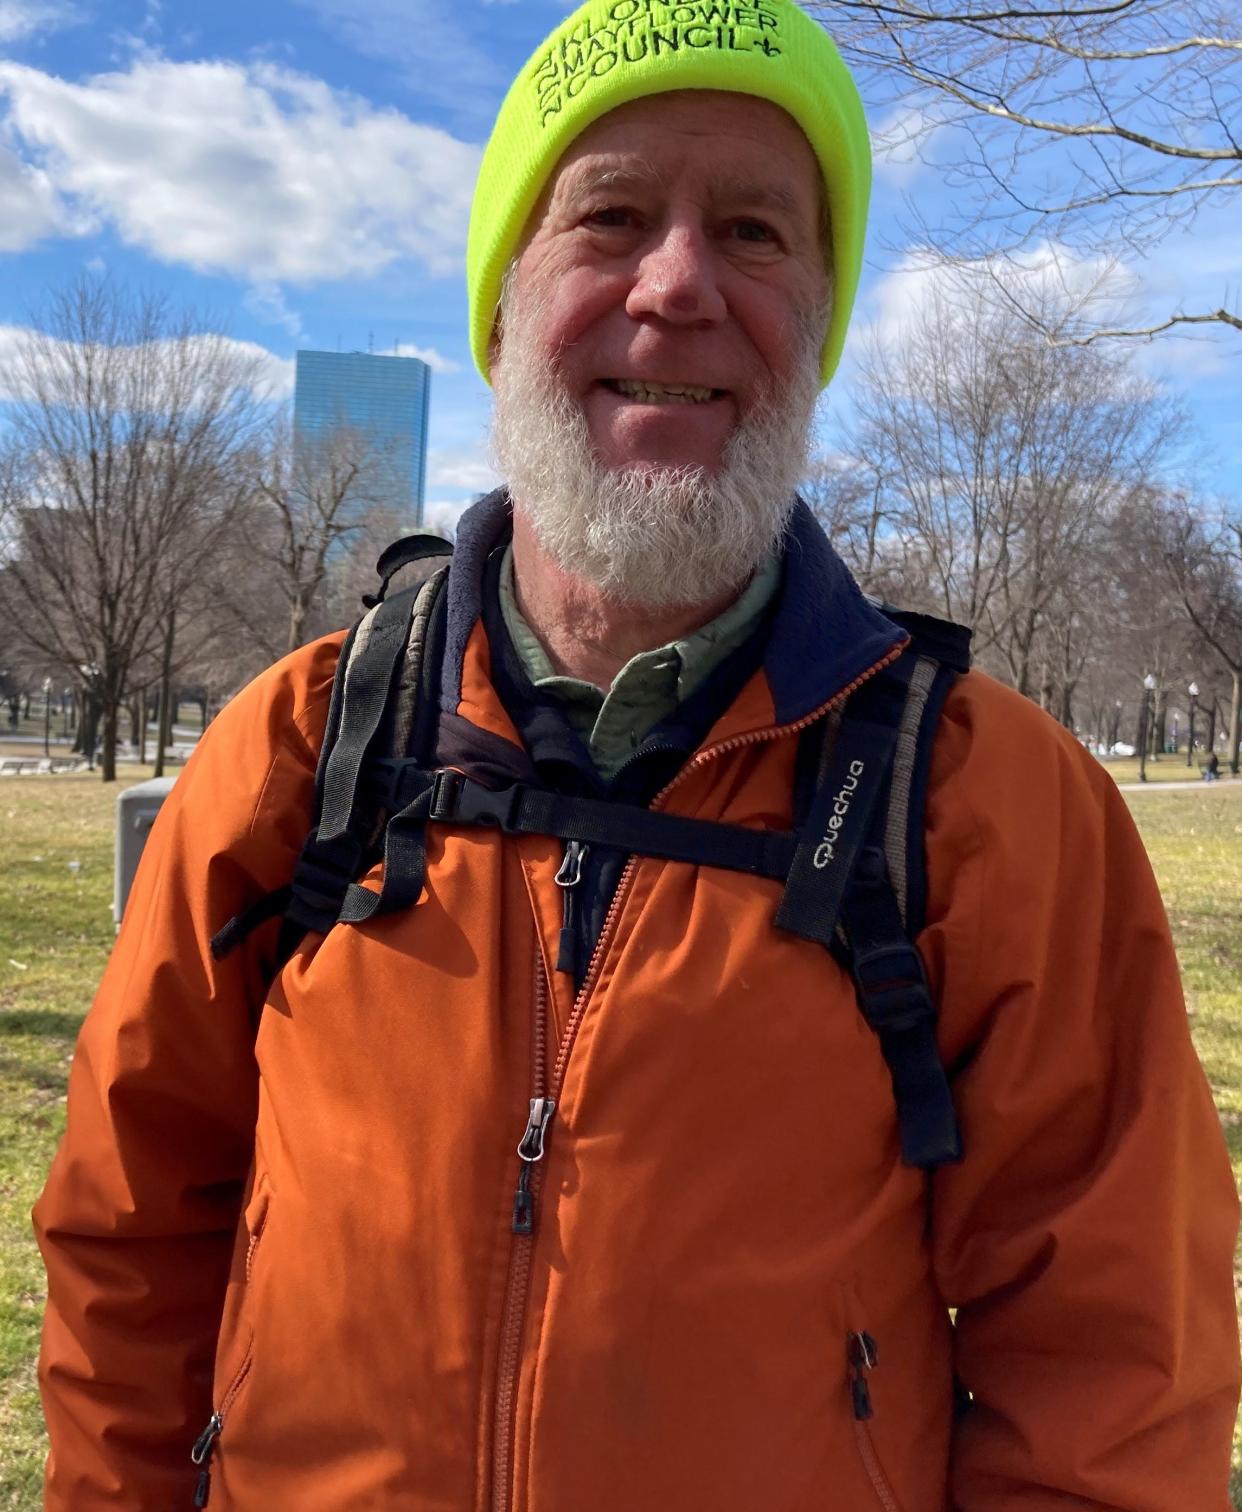 Tom McClintock recalls his first anti-hunger, anti-poverty campaign, a 20-mile walk through Boston, in 1968, reminiscing as he walked through the Boston Common Wednesday.